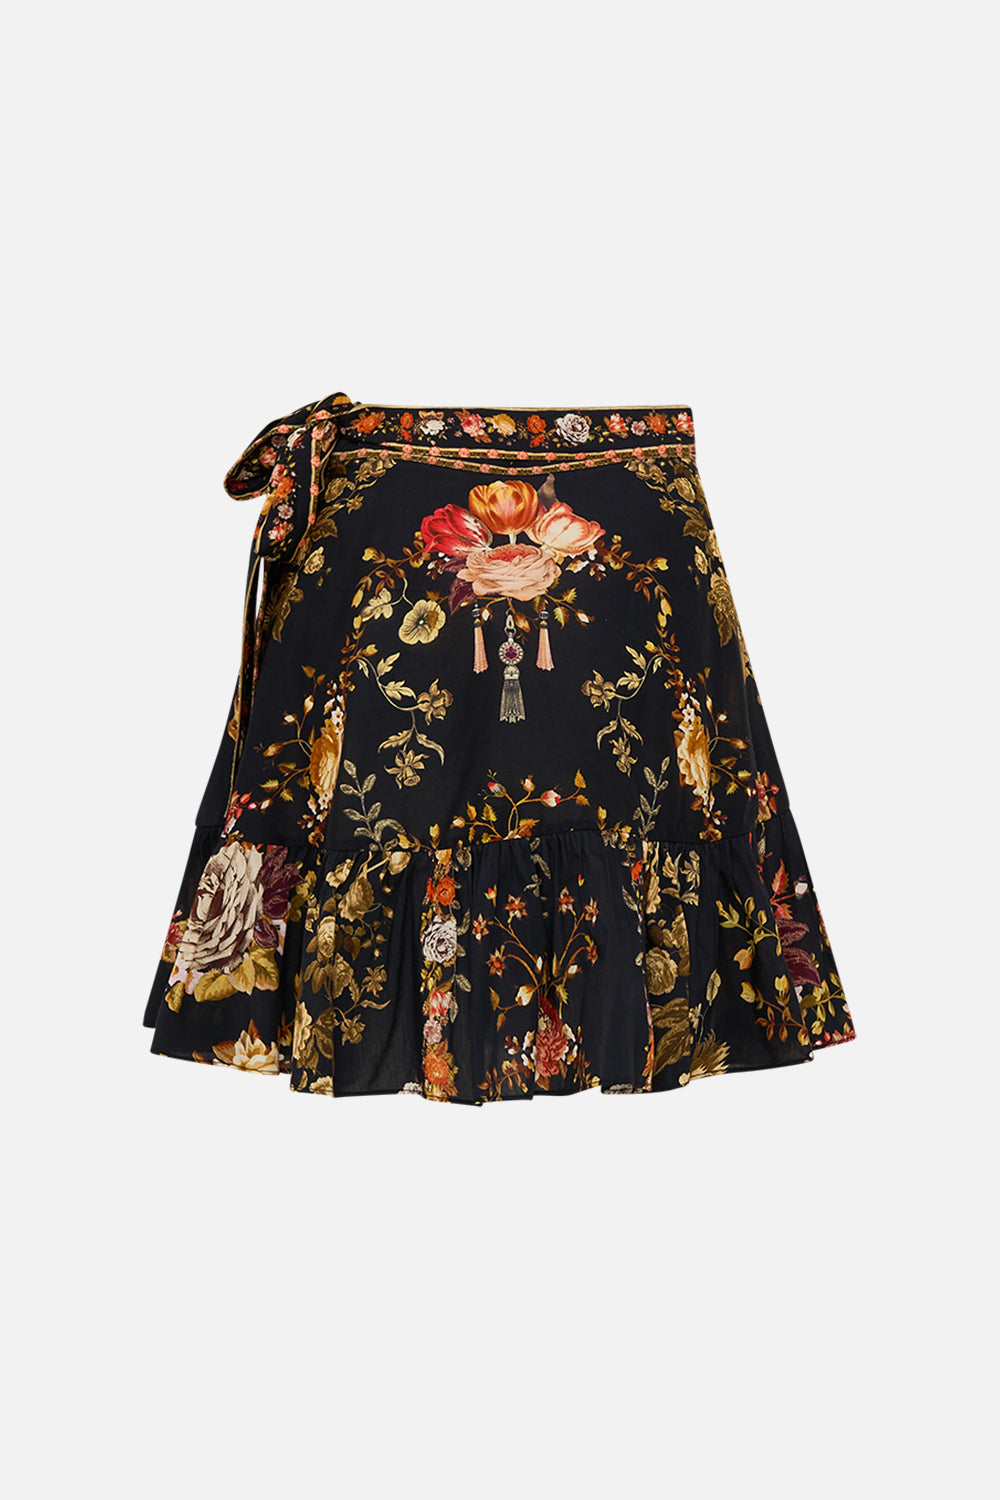 CAMILLA Floral Ruffle Hem Wrap Skirt in Stitched in Time